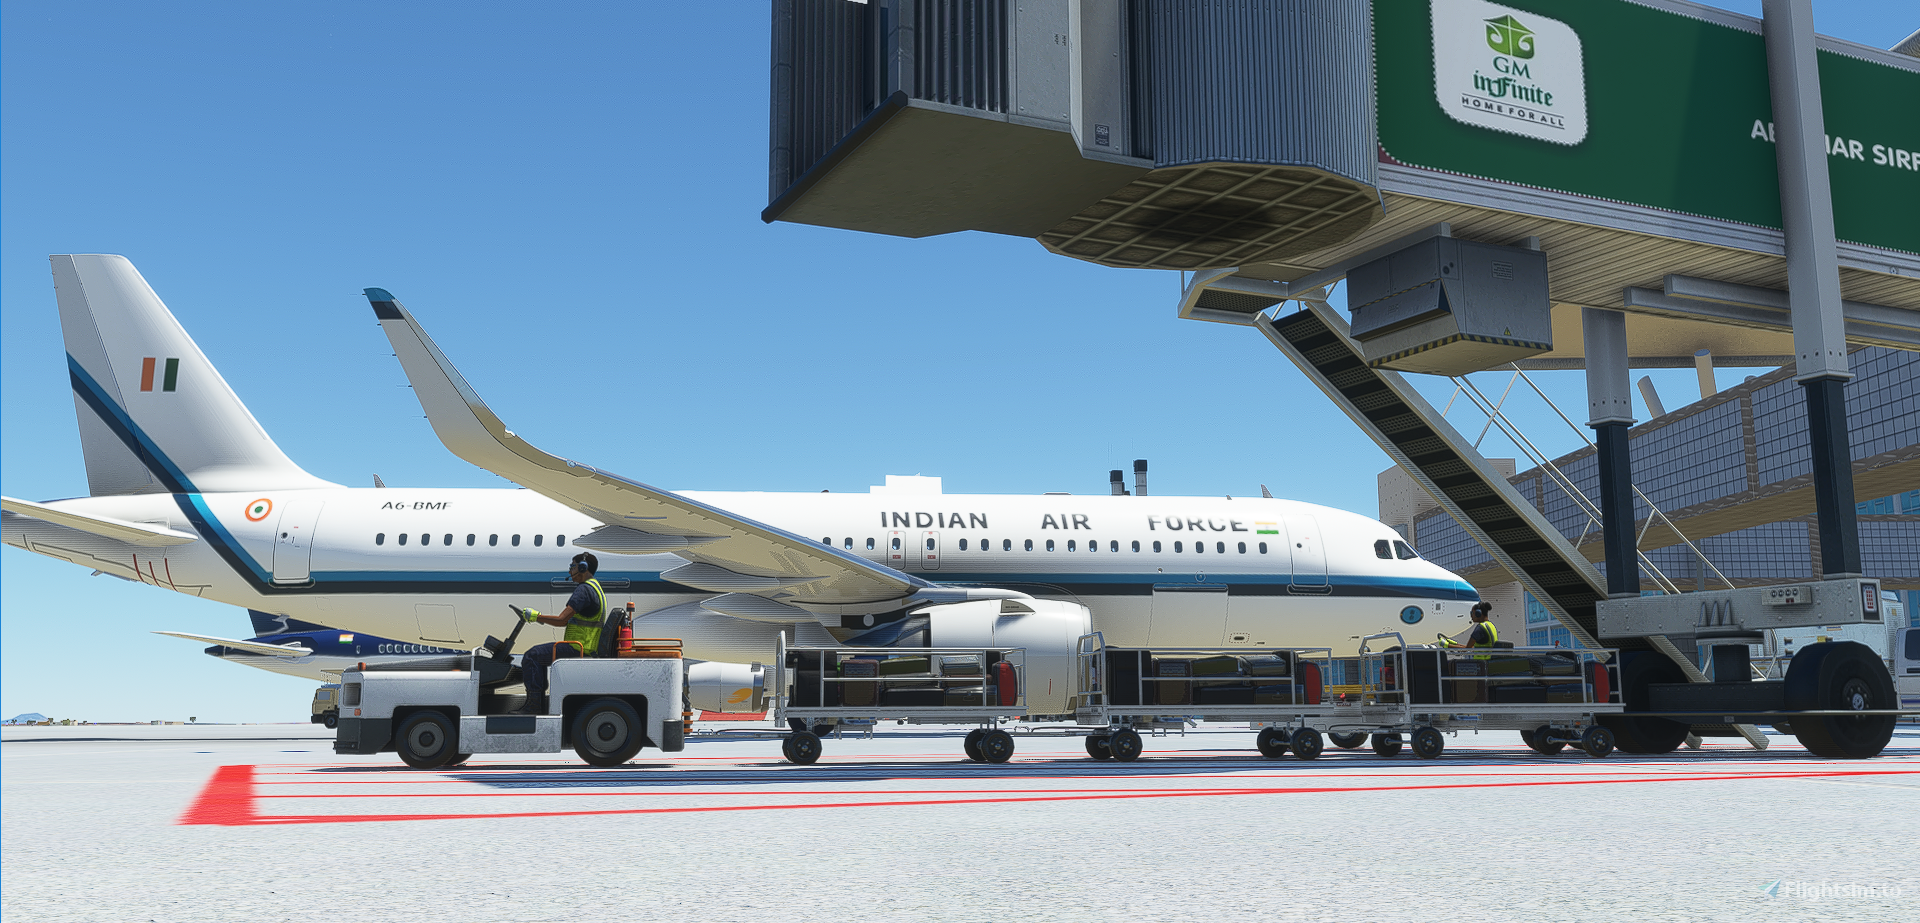 gsx ground services for fsx review